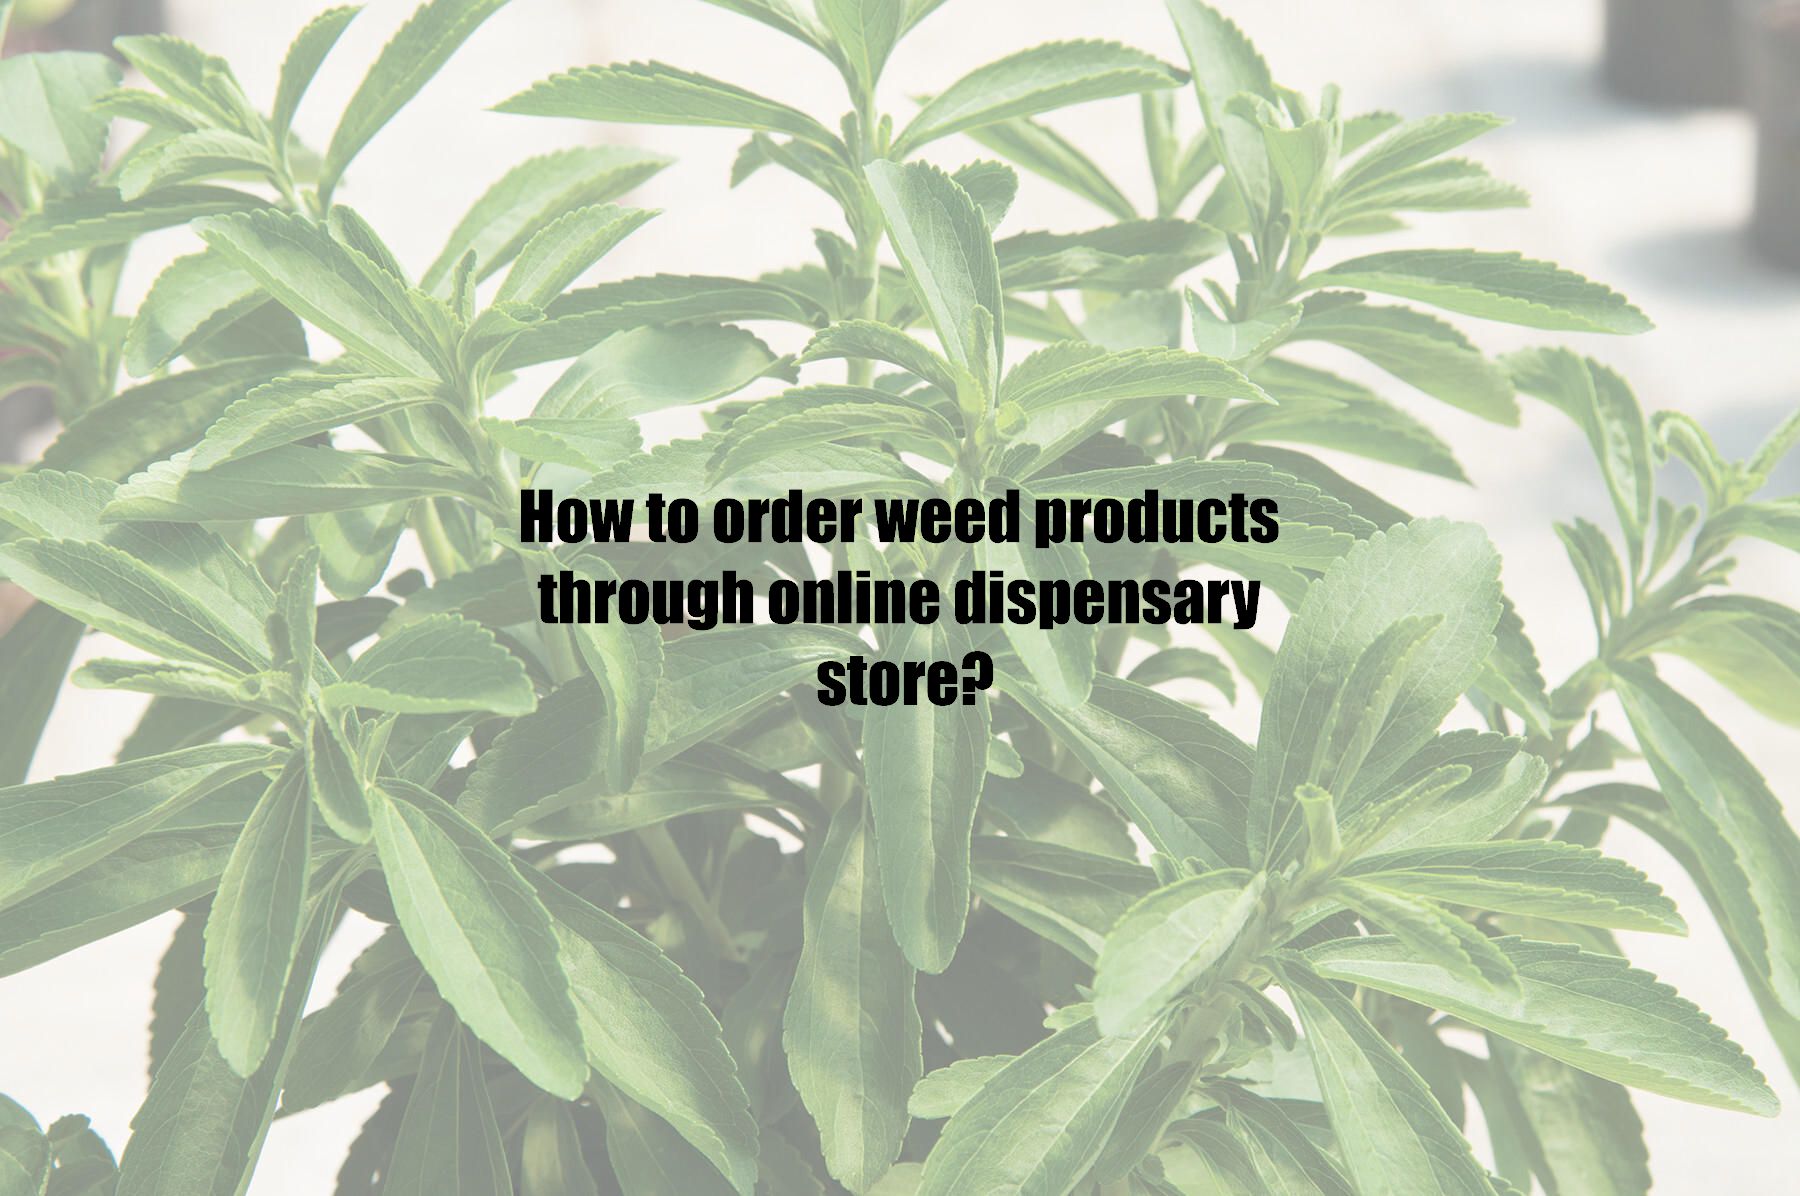 How to order weed products through online dispensary store?